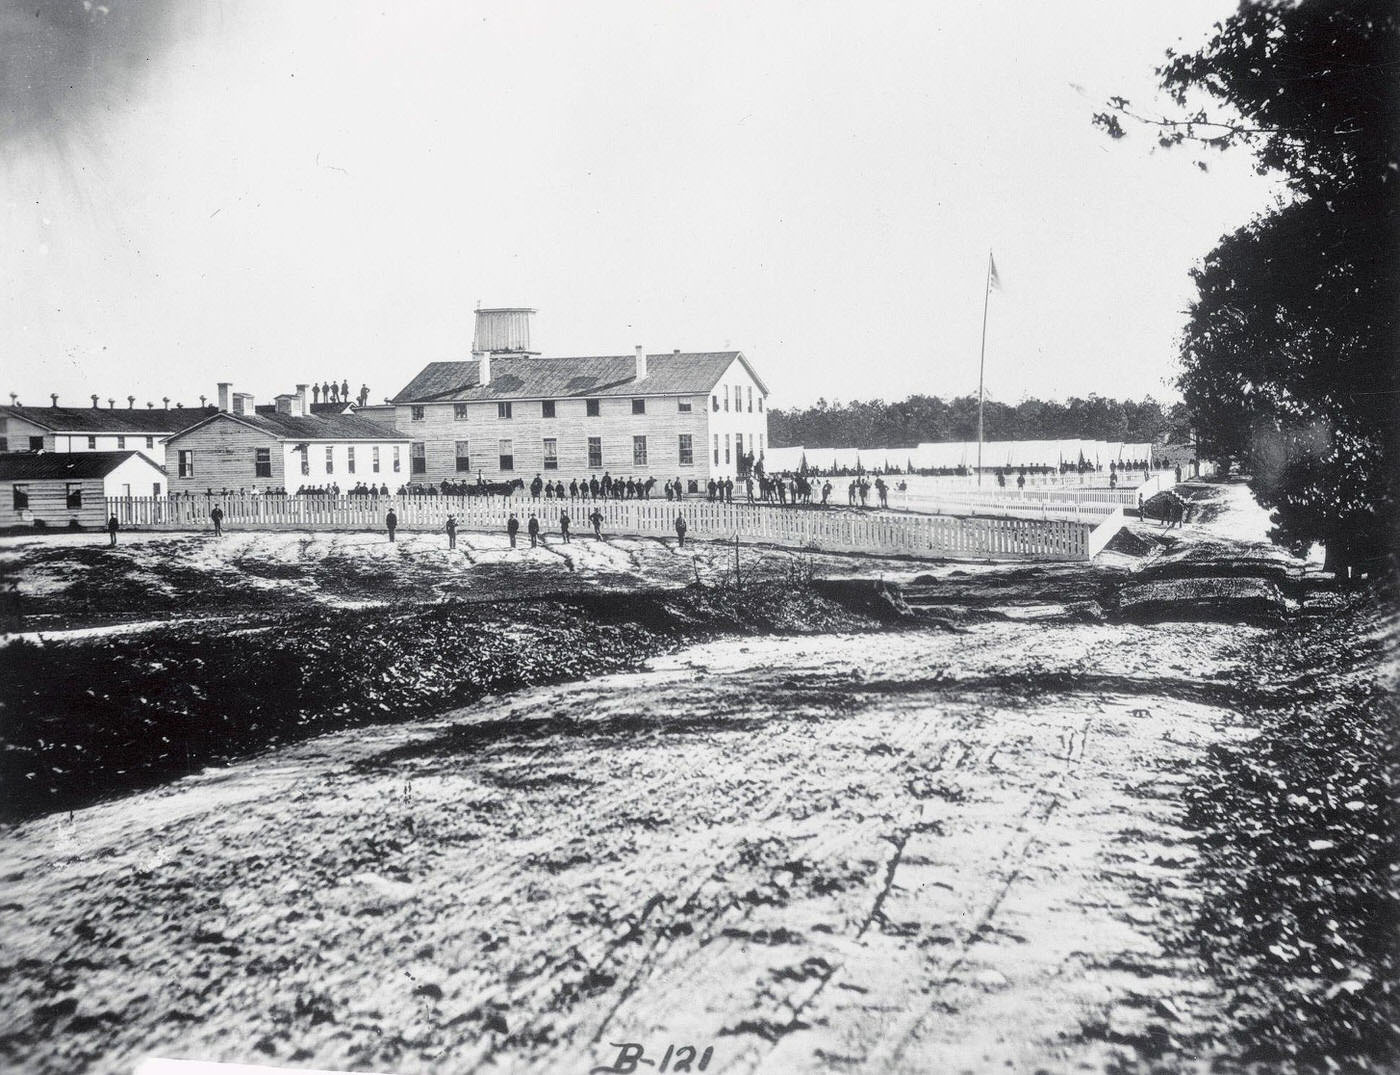 Hospital During the Civil war, 1860s